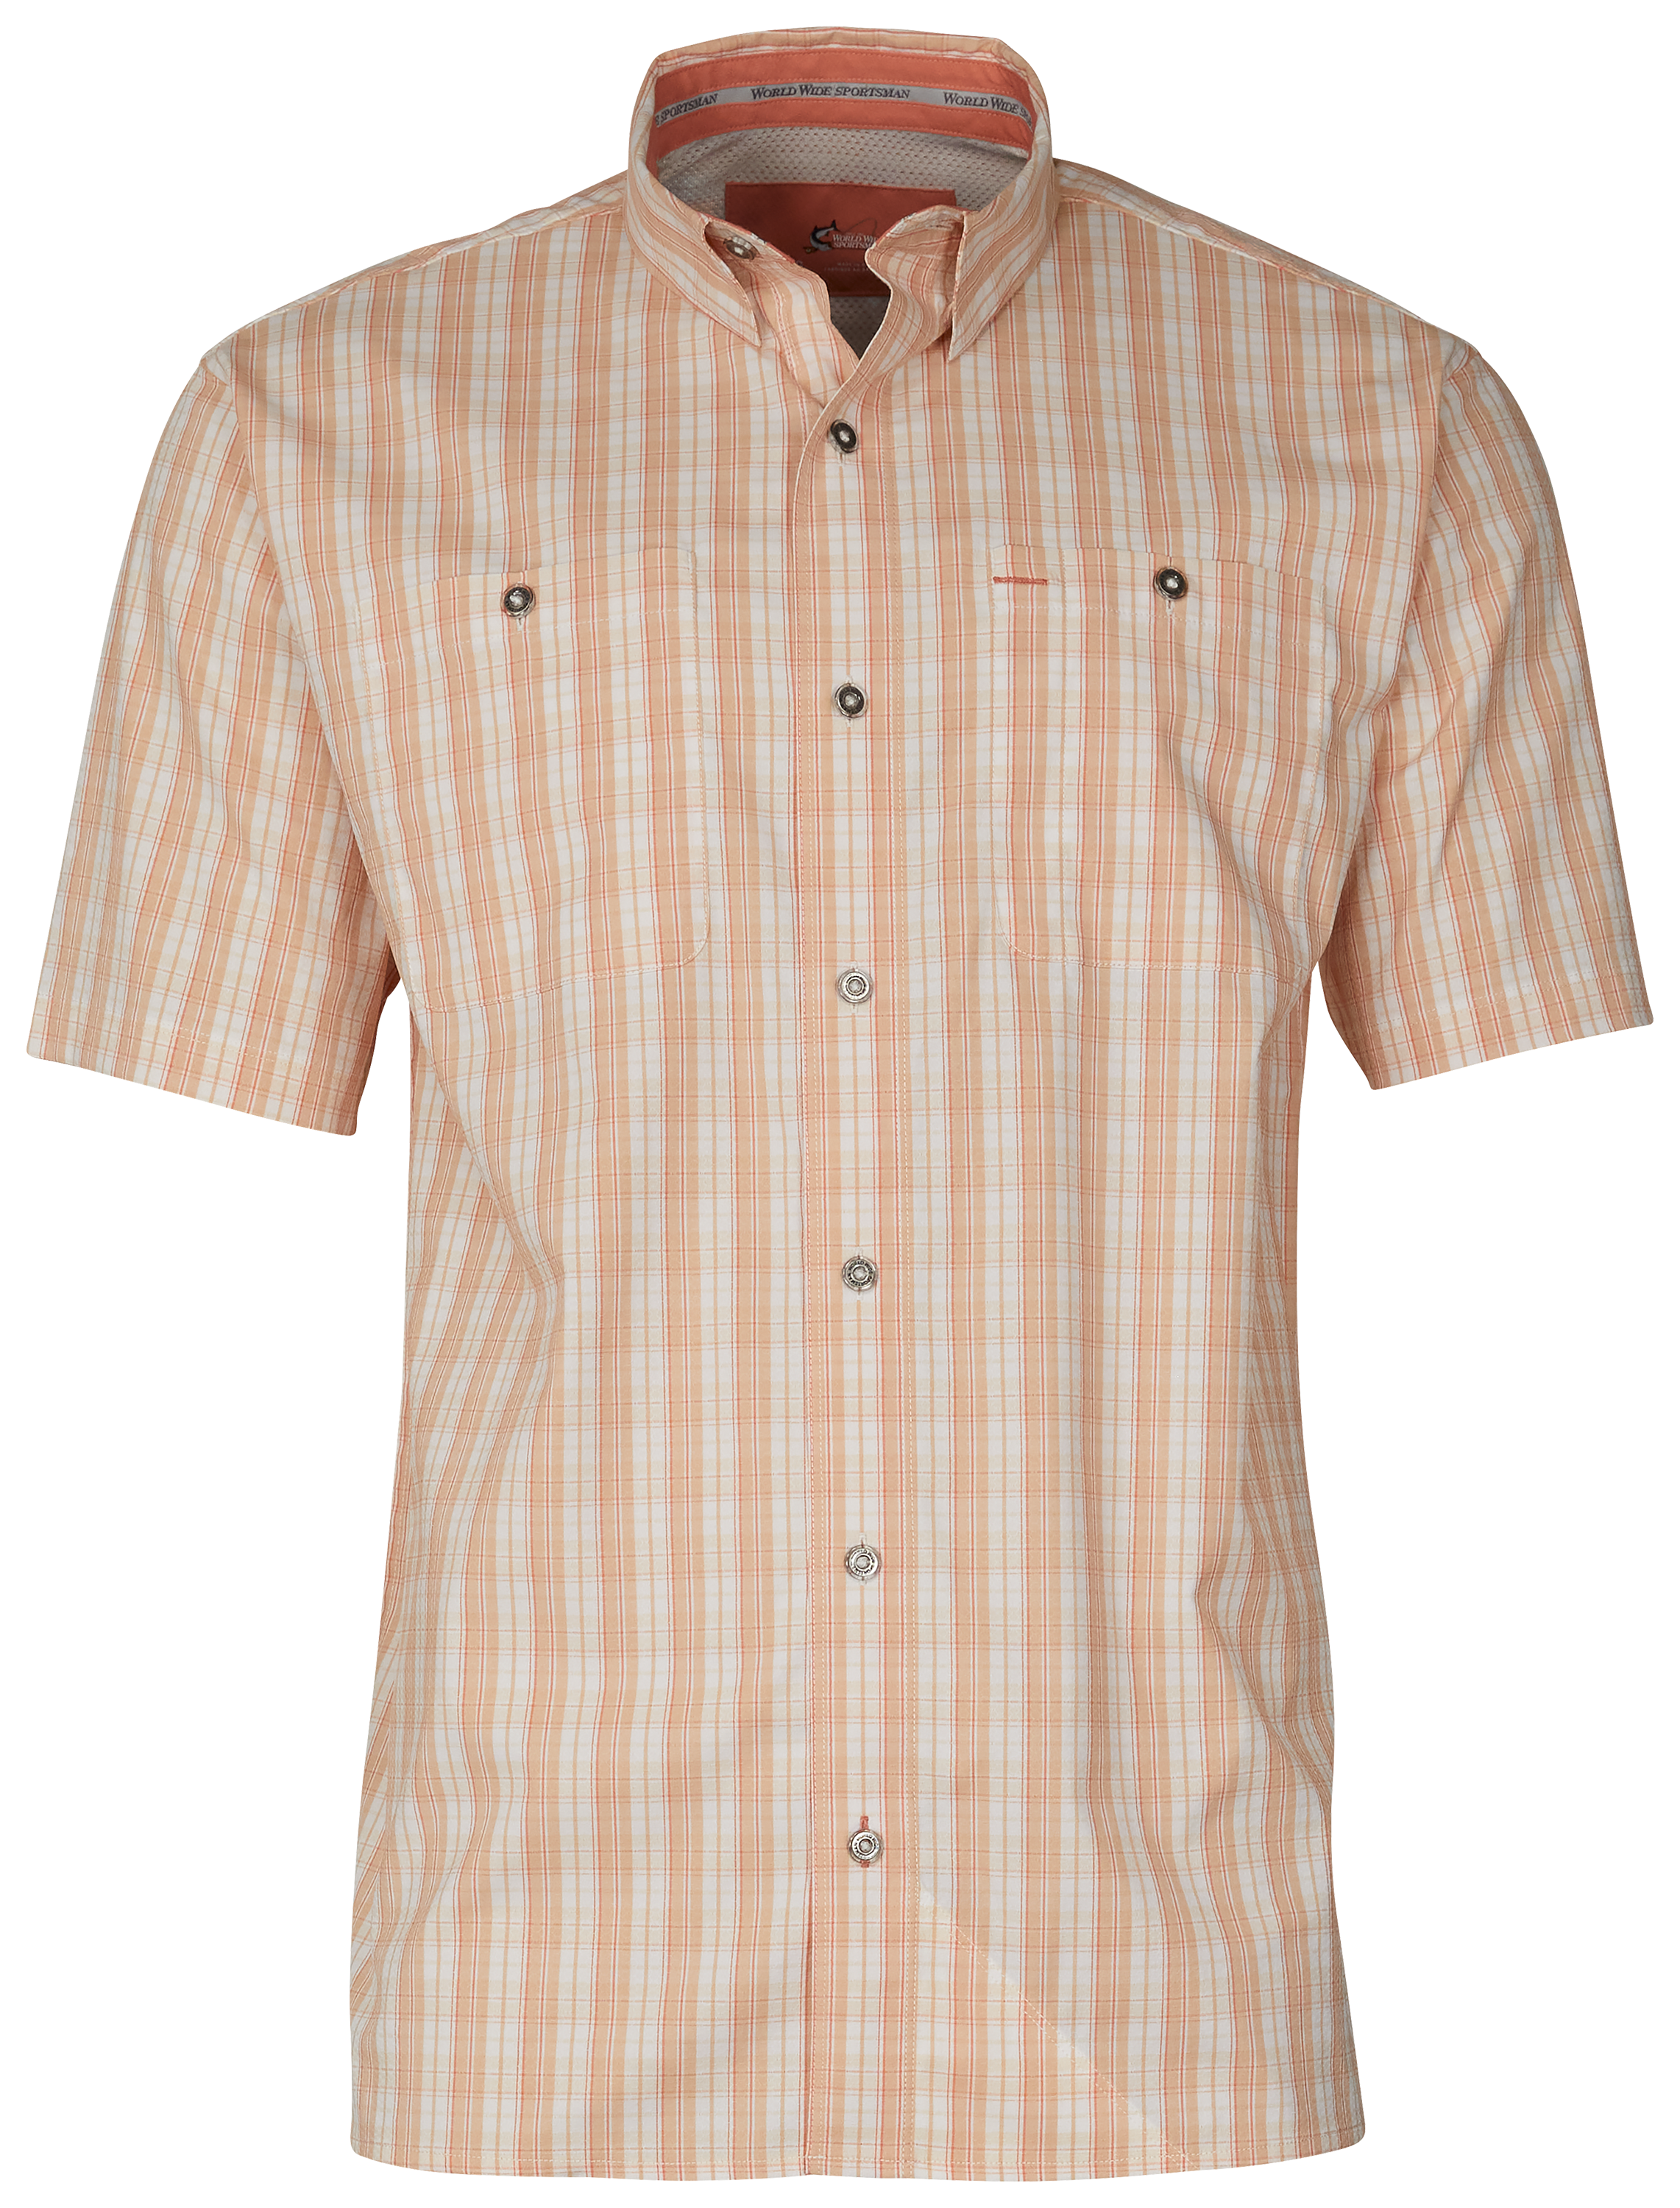 World Wide Sportsman Ultimate Angler Plaid Short-Sleeve Shirt for Men - Almost Apricot Plaid - XL